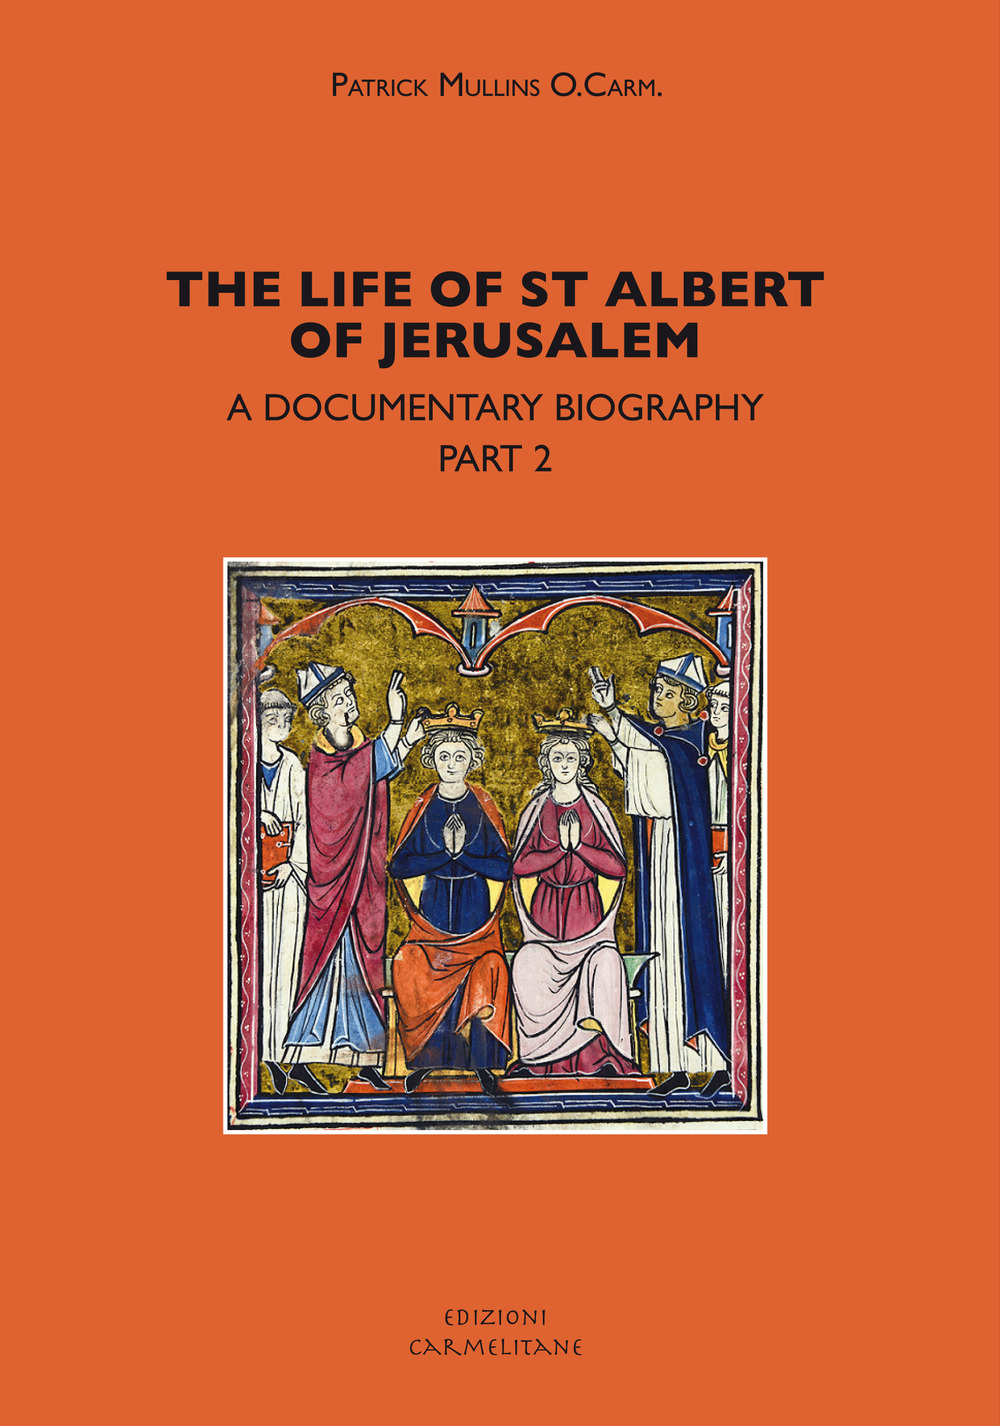 The life of st. Albert of Jerusalem. A documentary biography. Vol. 2